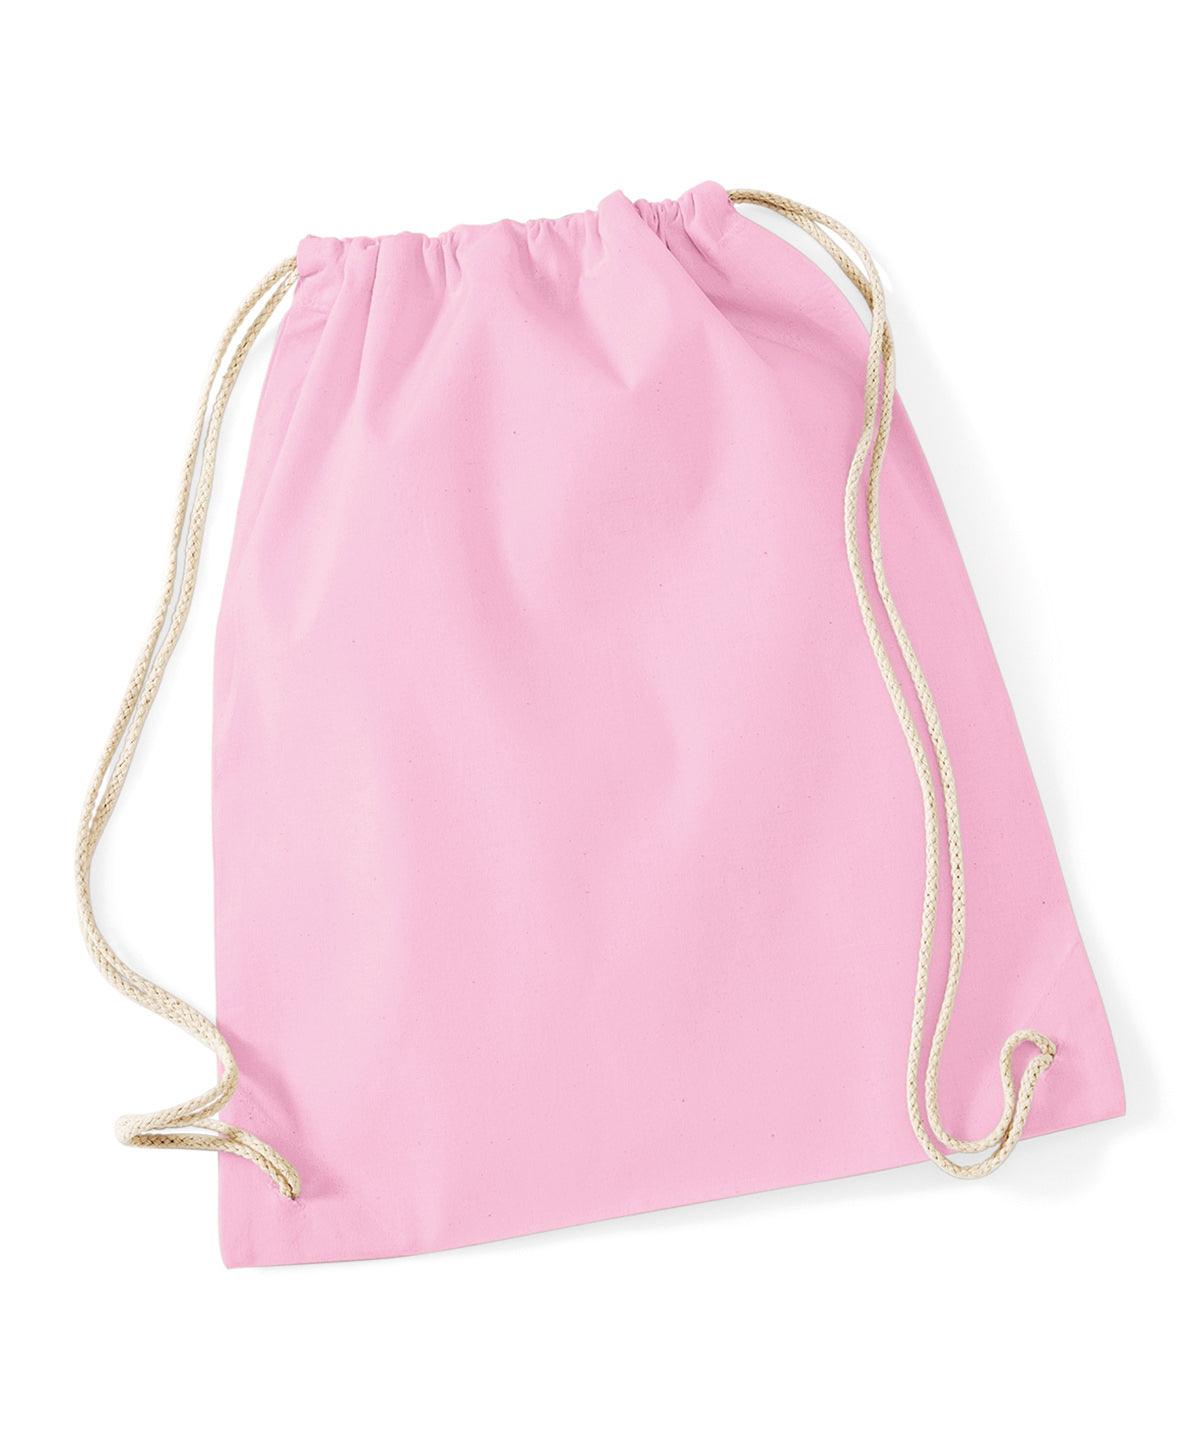 Classic Pink/White - Cotton gymsac Bags Westford Mill Bags & Luggage, Junior, Must Haves, Pastels and Tie Dye Schoolwear Centres